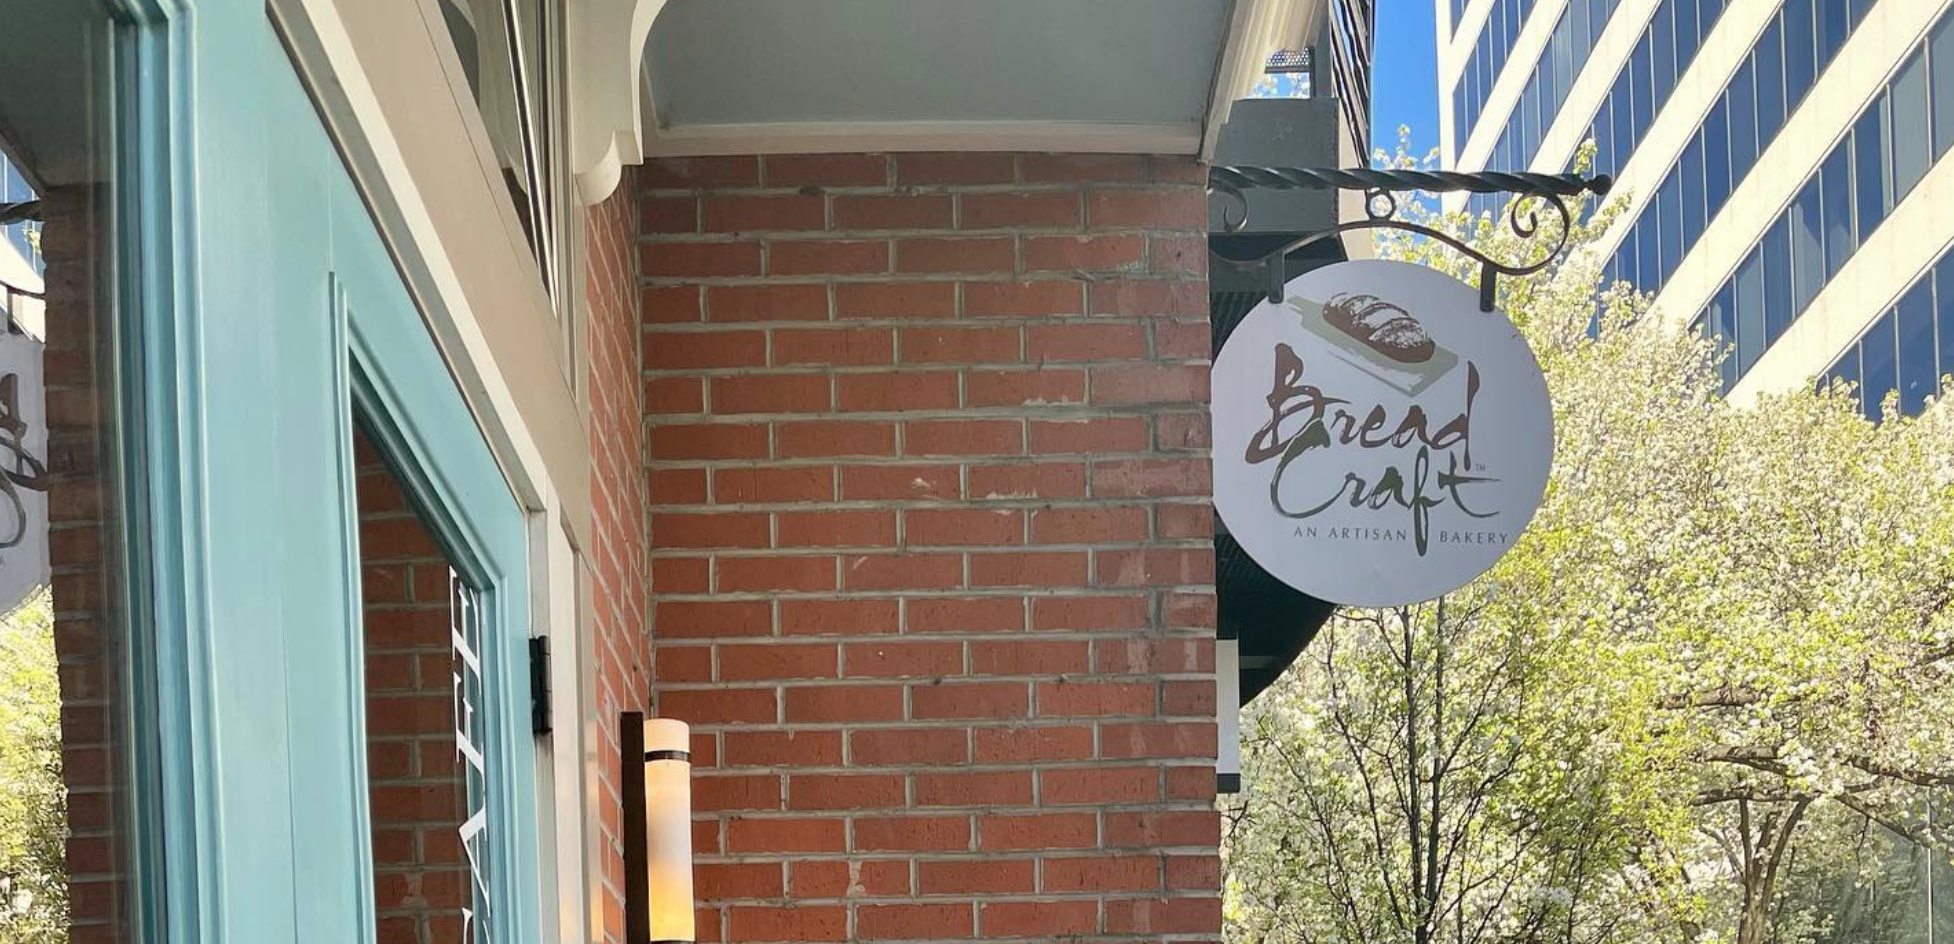 The Sunday Brunch At Bread Craft In Virginia Is What Foodie Dreams Are Made Of